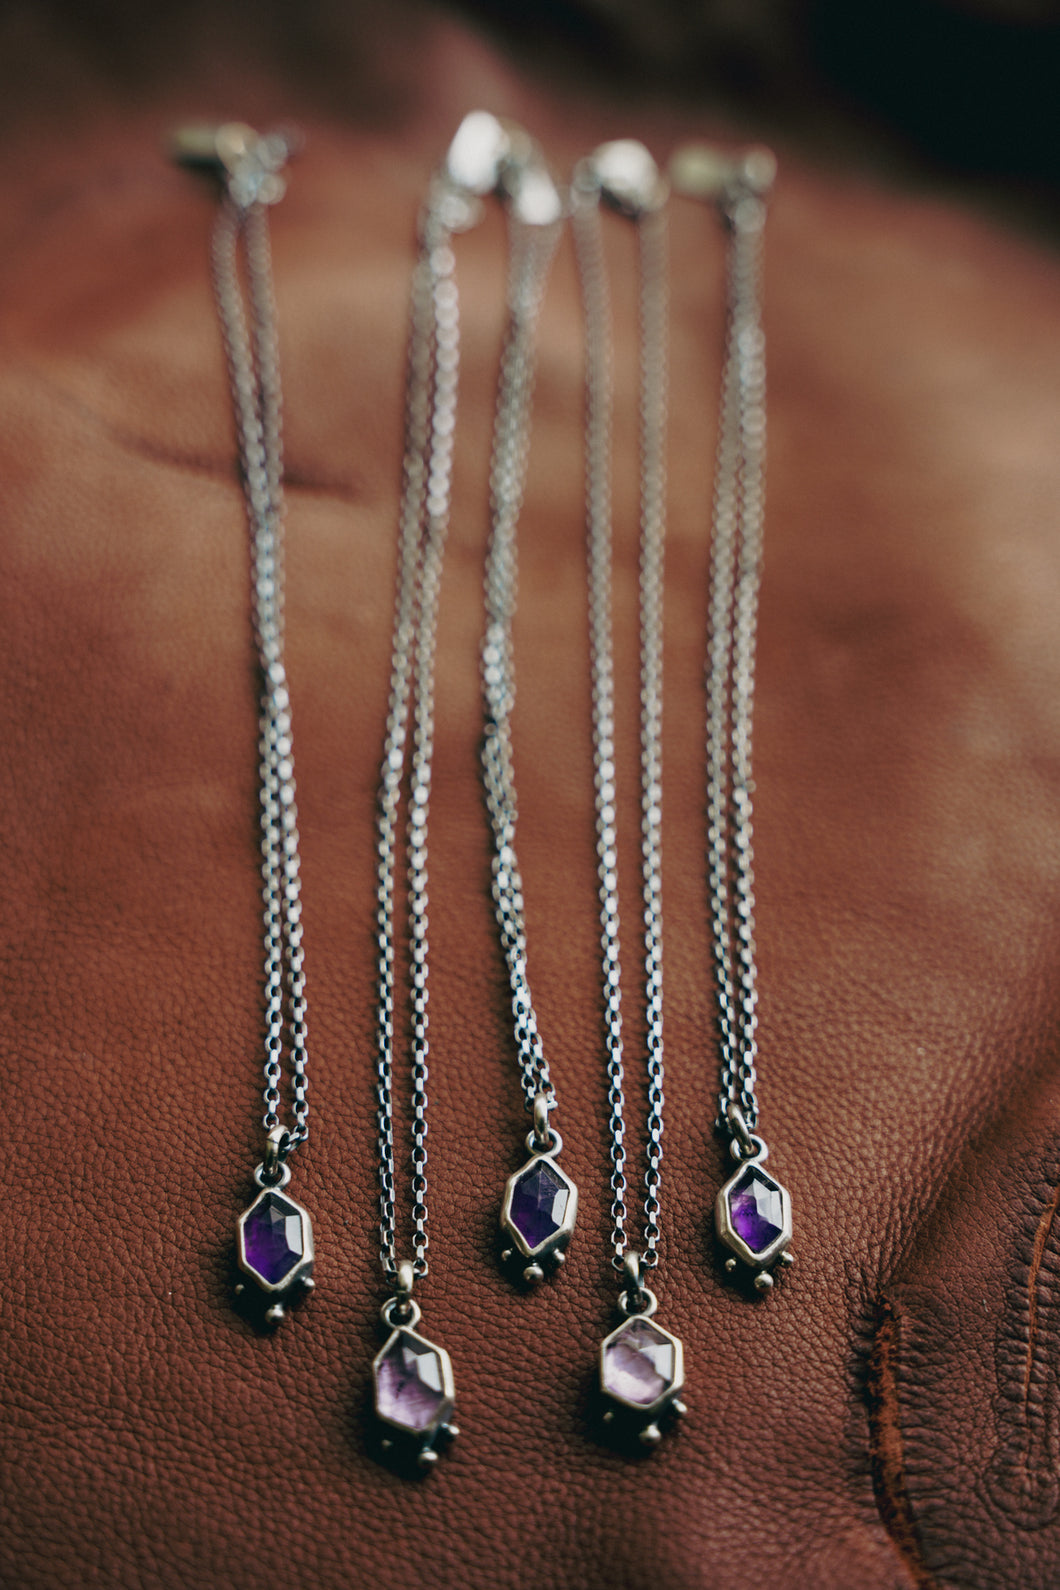 February Necklace -- Amethyst